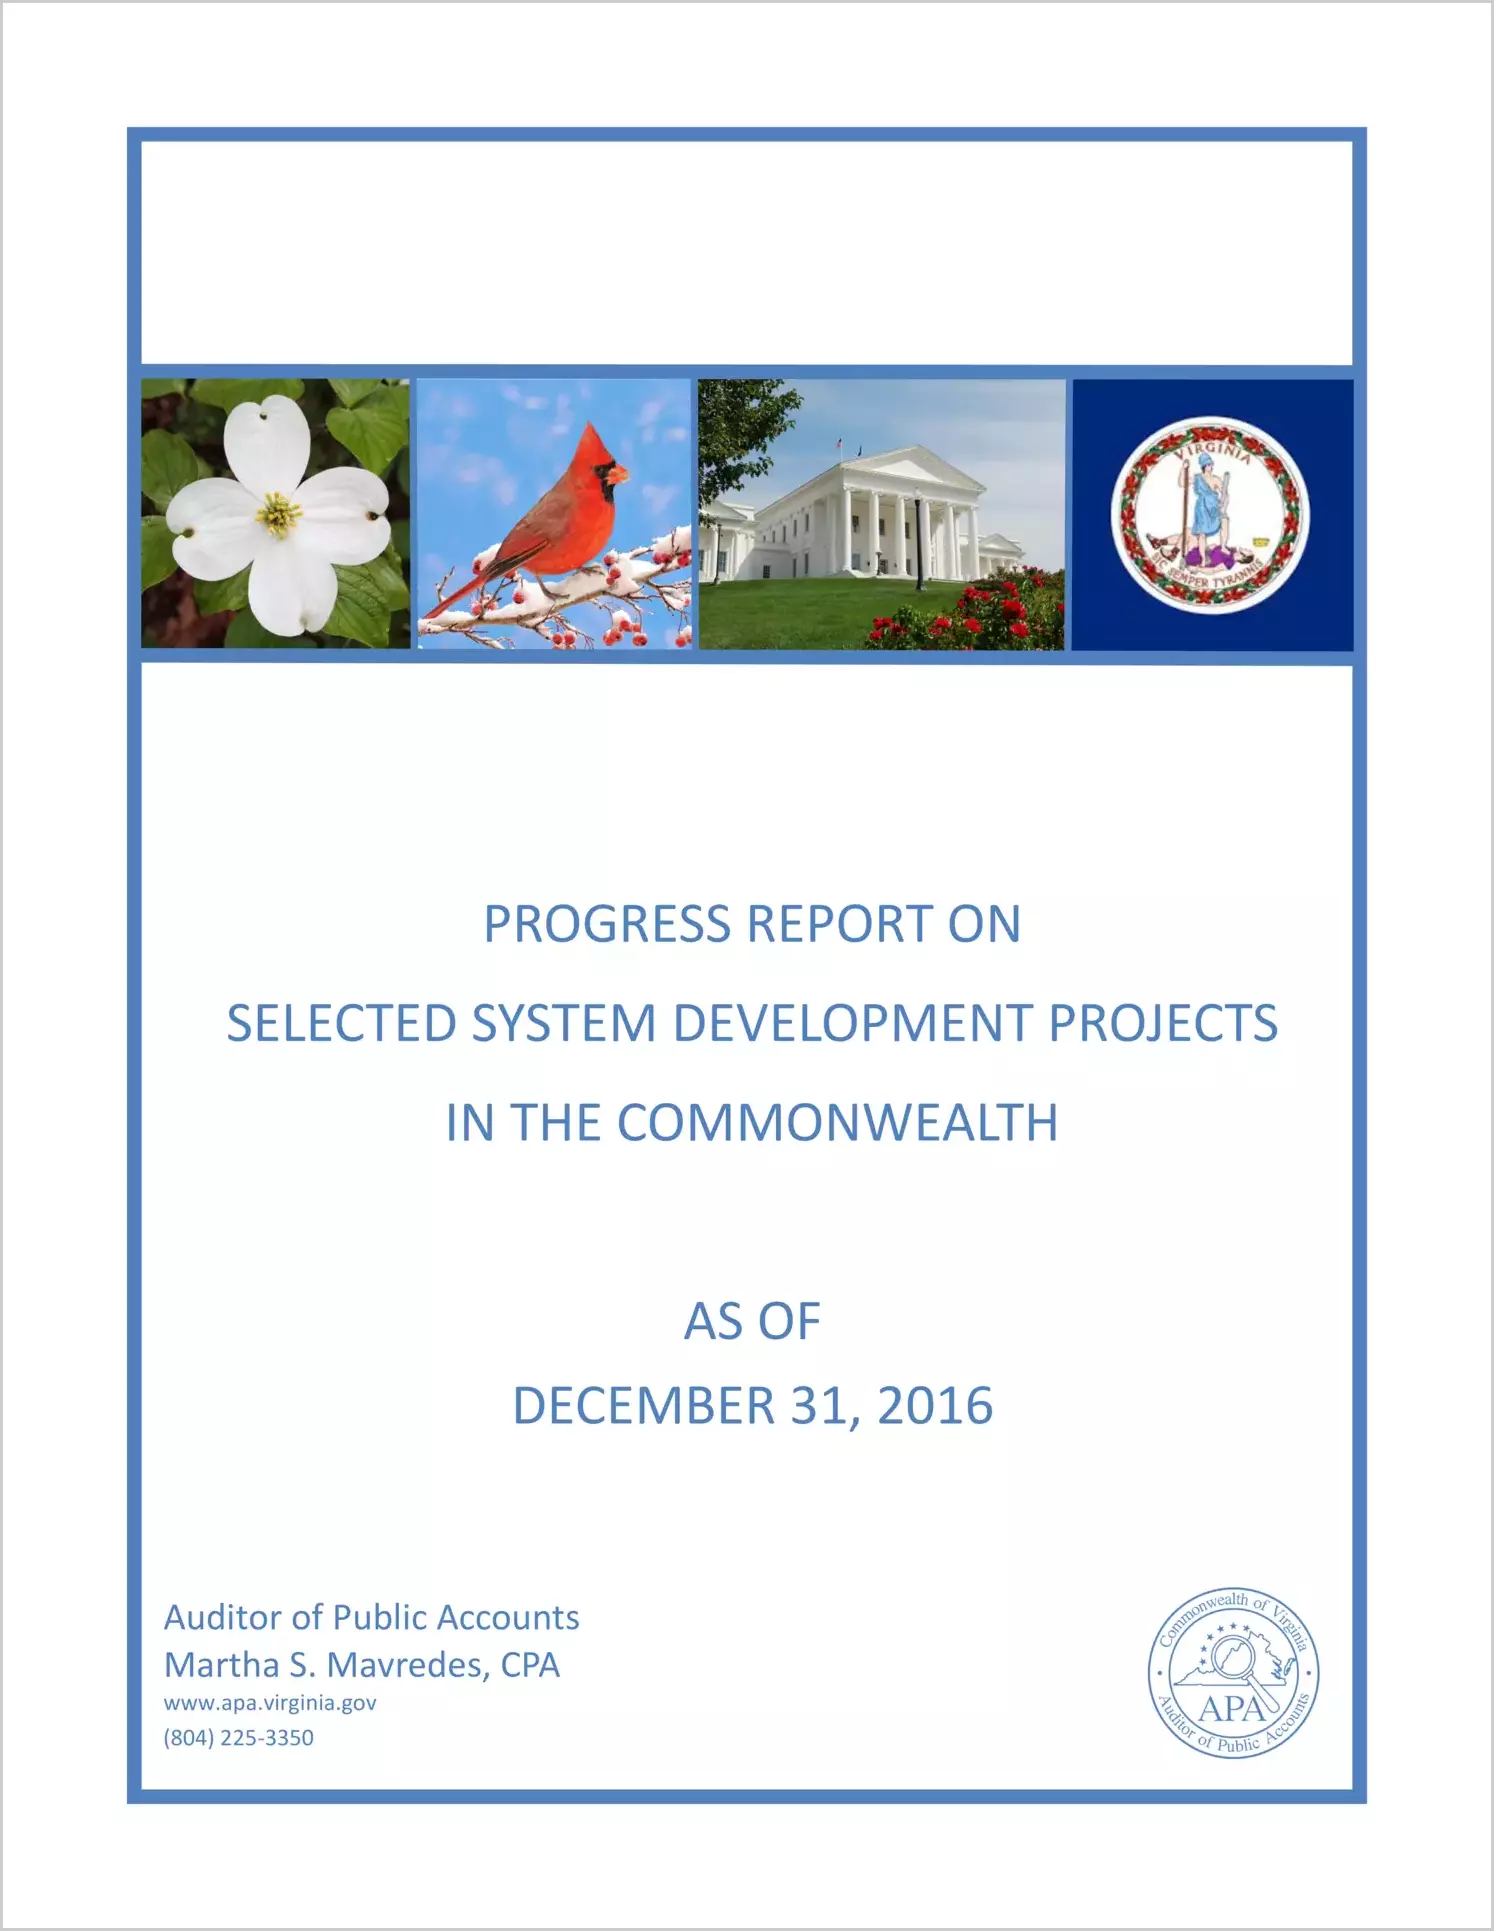 Progress Report on Selected System Development Projects in the Commonwealth as of December 31, 2016